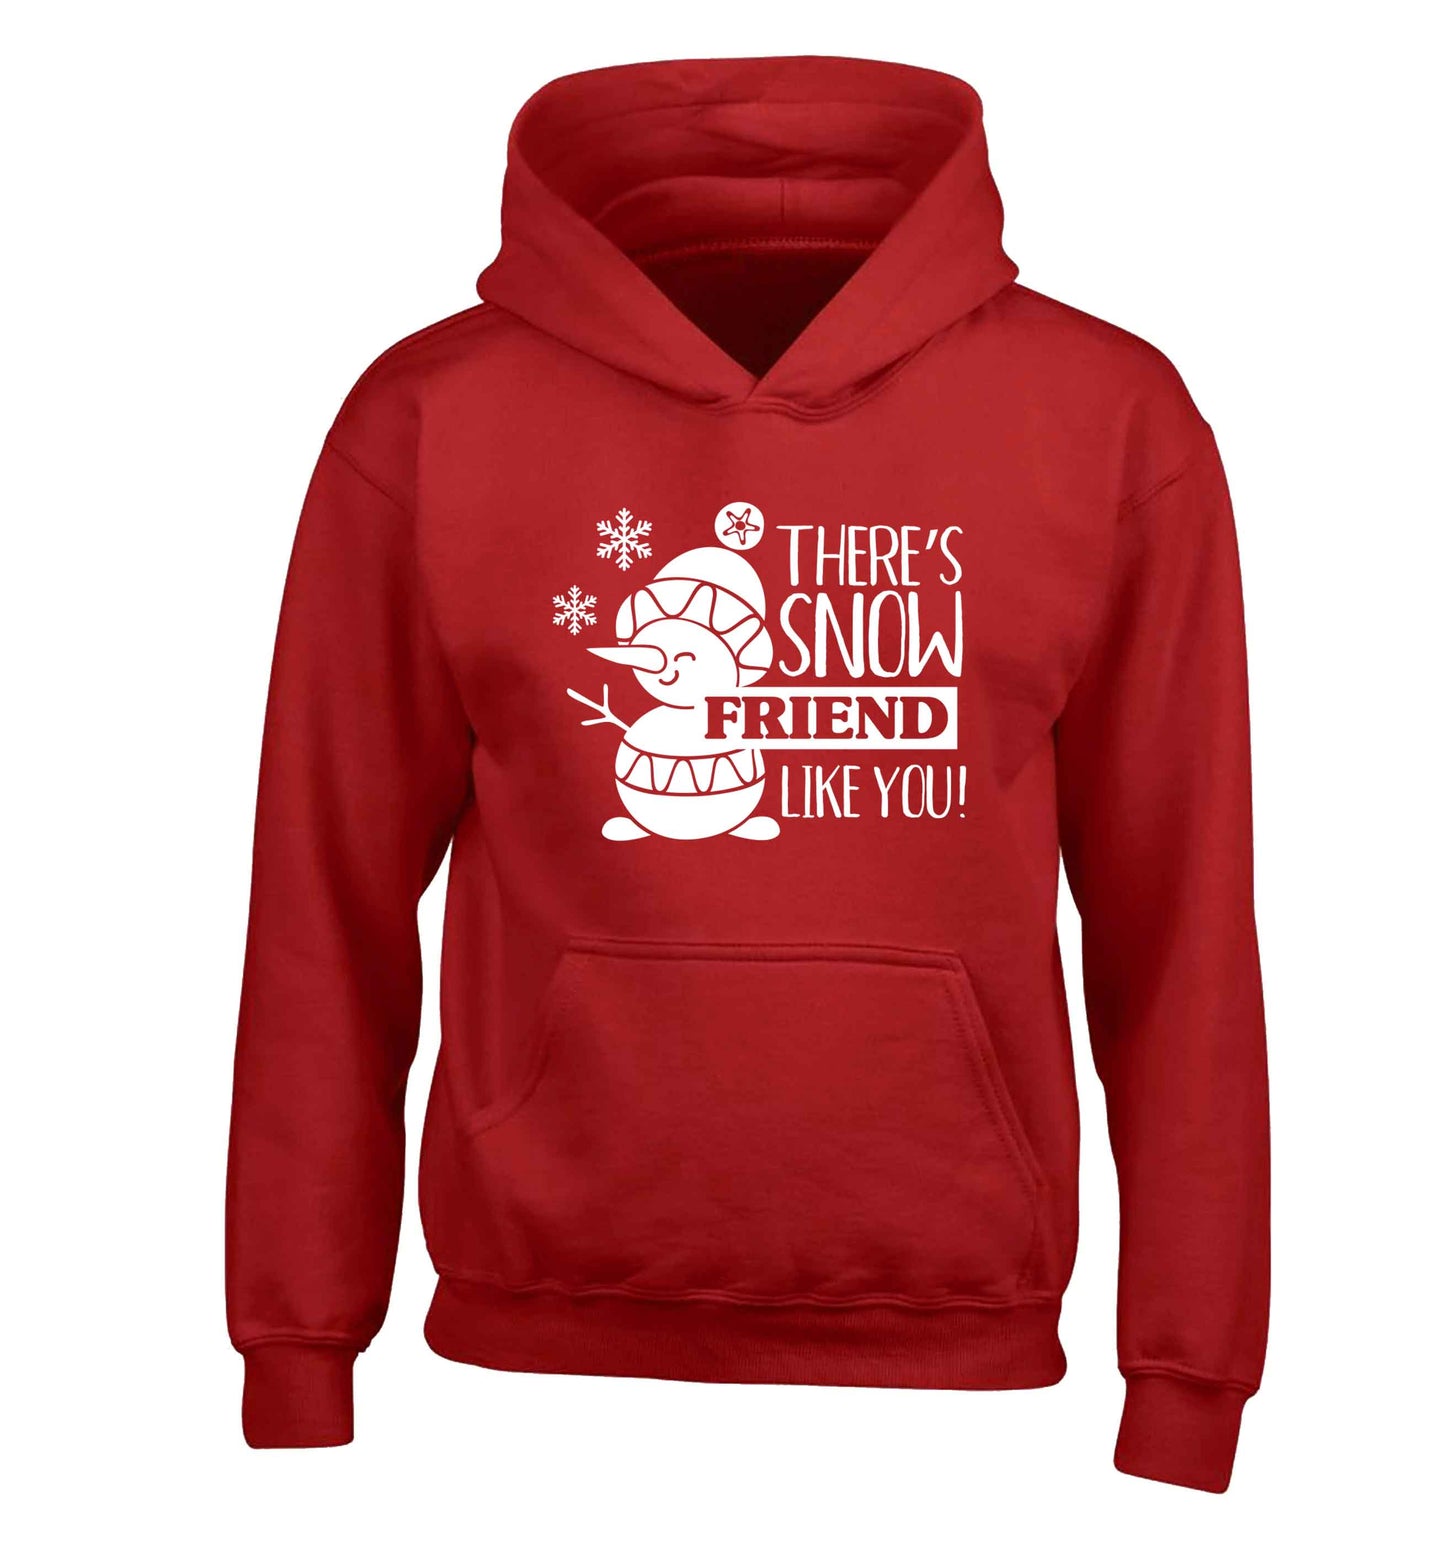 There's snow friend like you children's red hoodie 12-13 Years